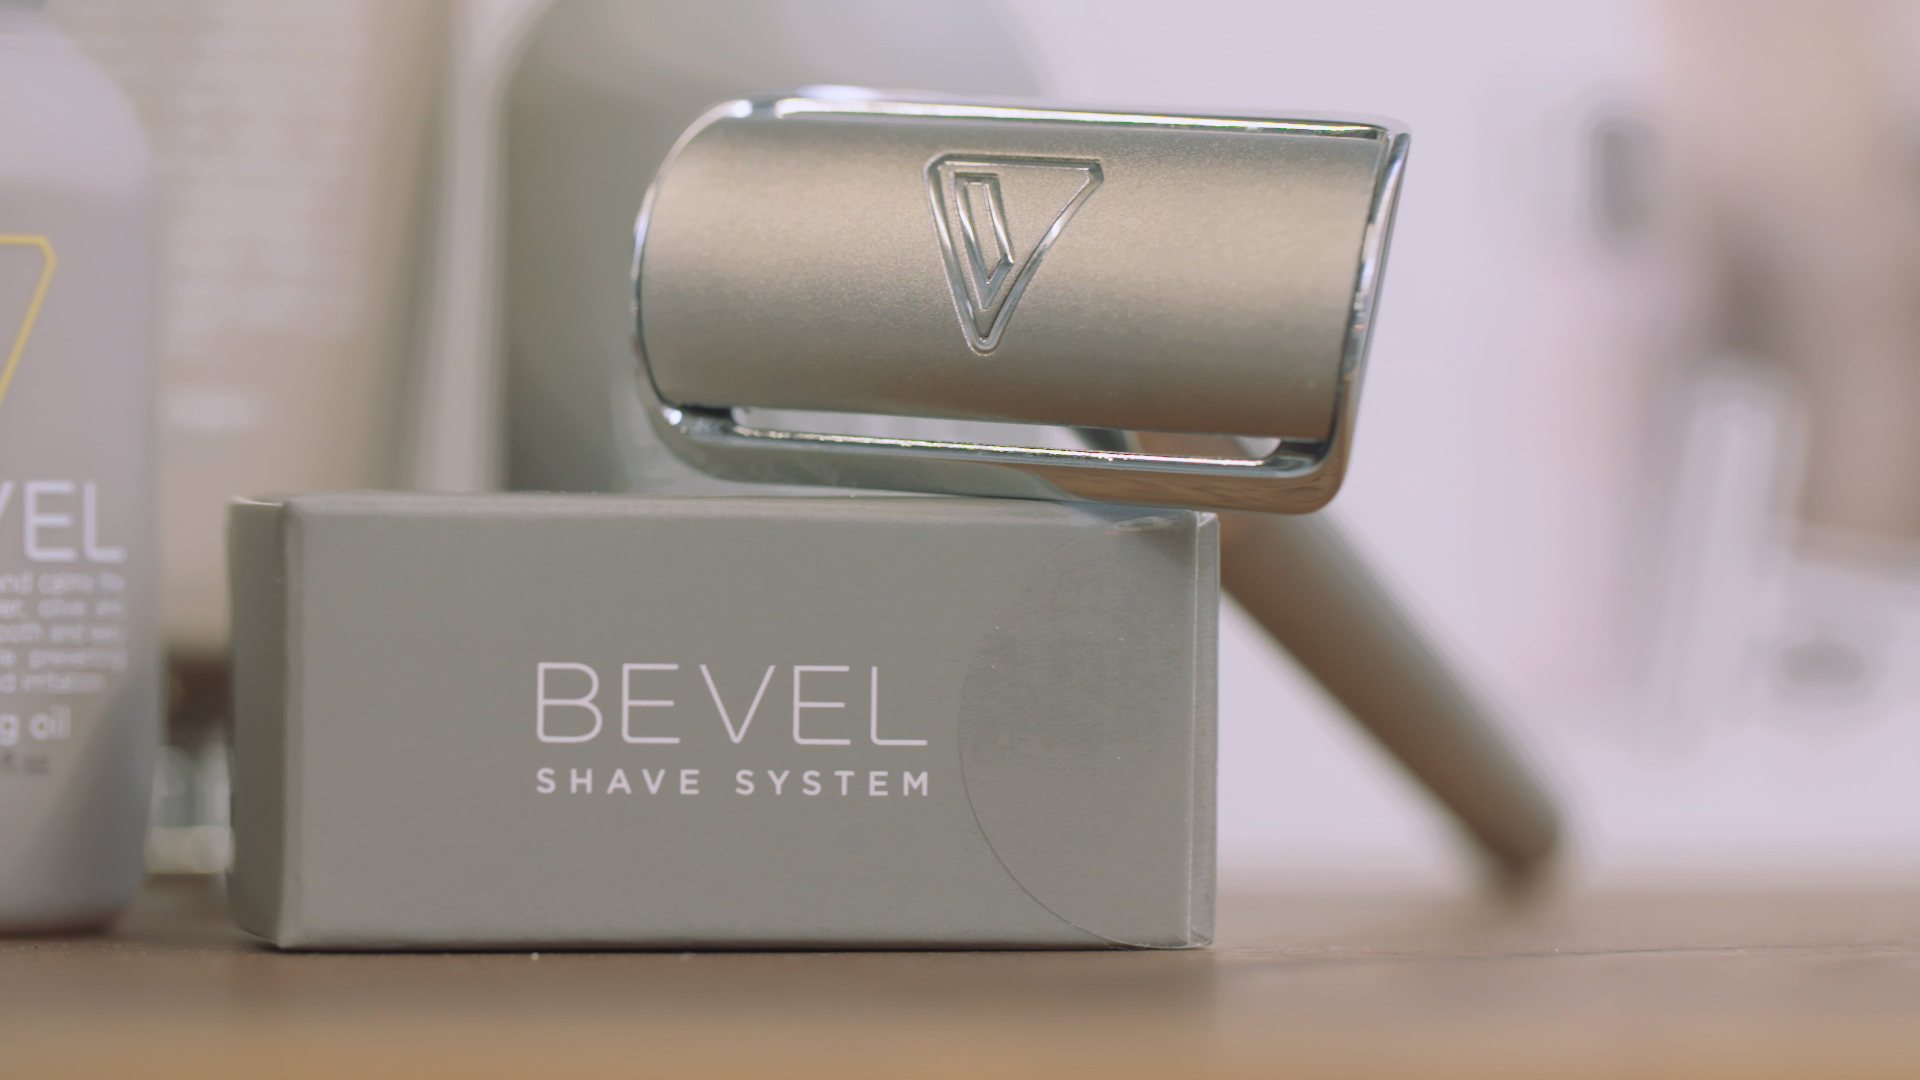 bevel clippers target